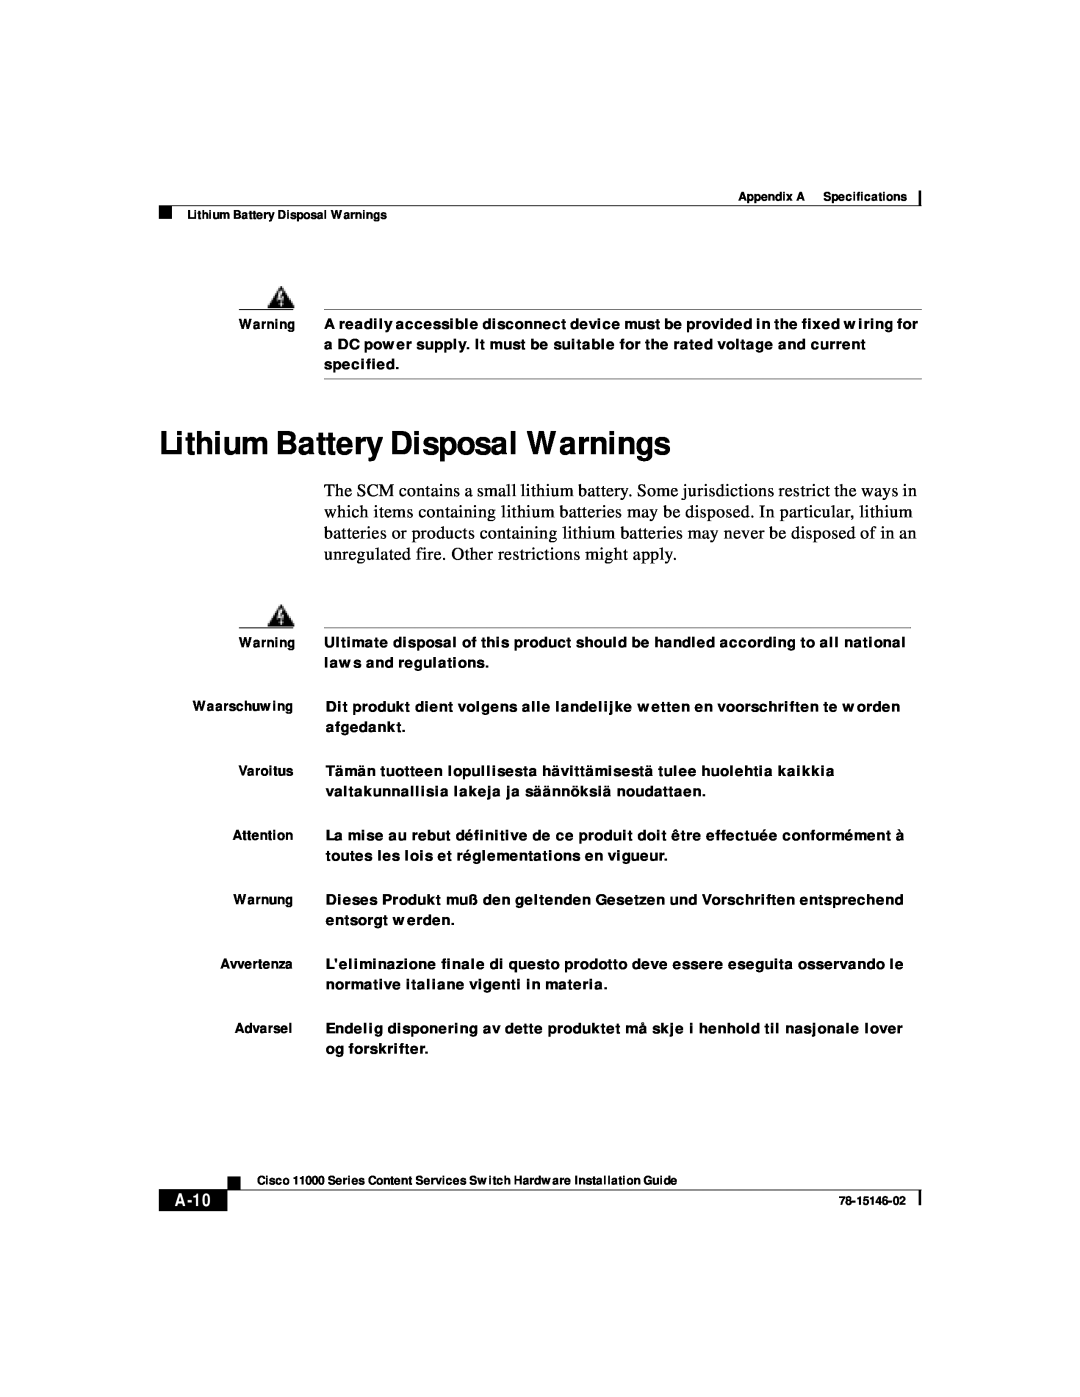 Cisco Systems 11000 Series manual Lithium Battery Disposal Warnings, A-10 